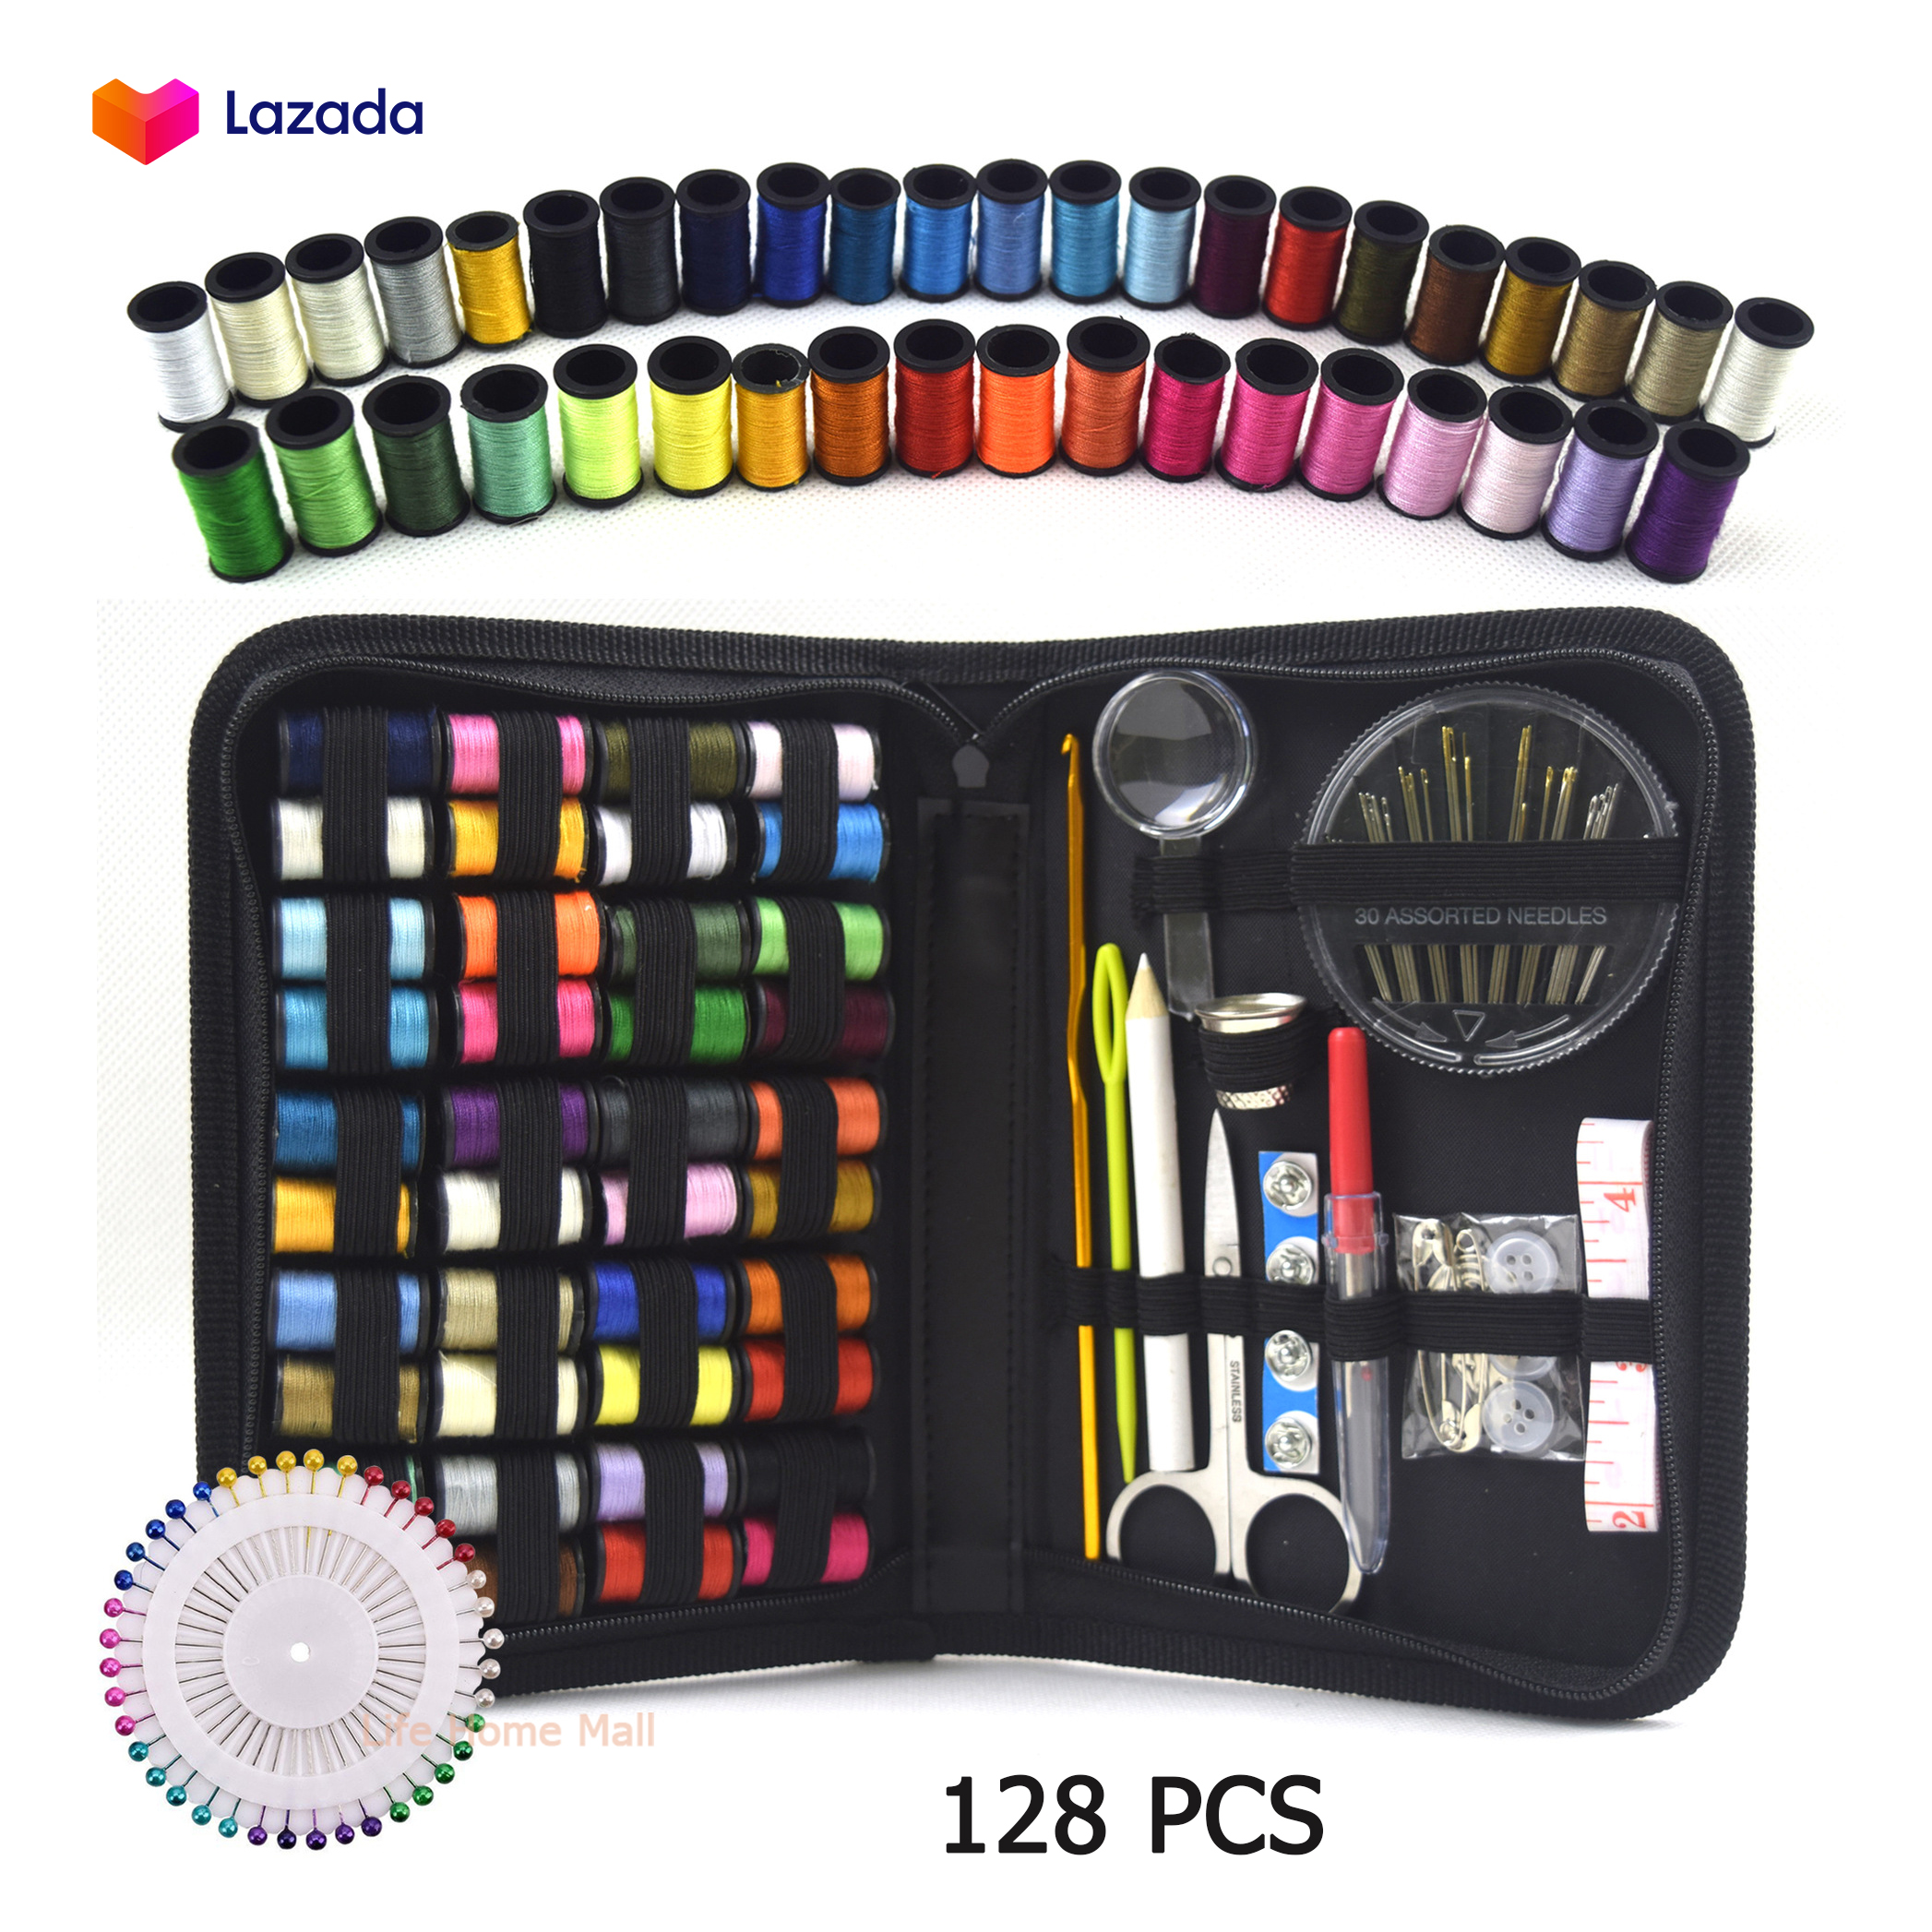 GOANDO Sewing Kit for Adults 206 Pcs Thread and Needle Kit 41 XL Upgrade  Spools of Thread Portable Sewing Supplies for Beginners,Emergency,Traveler